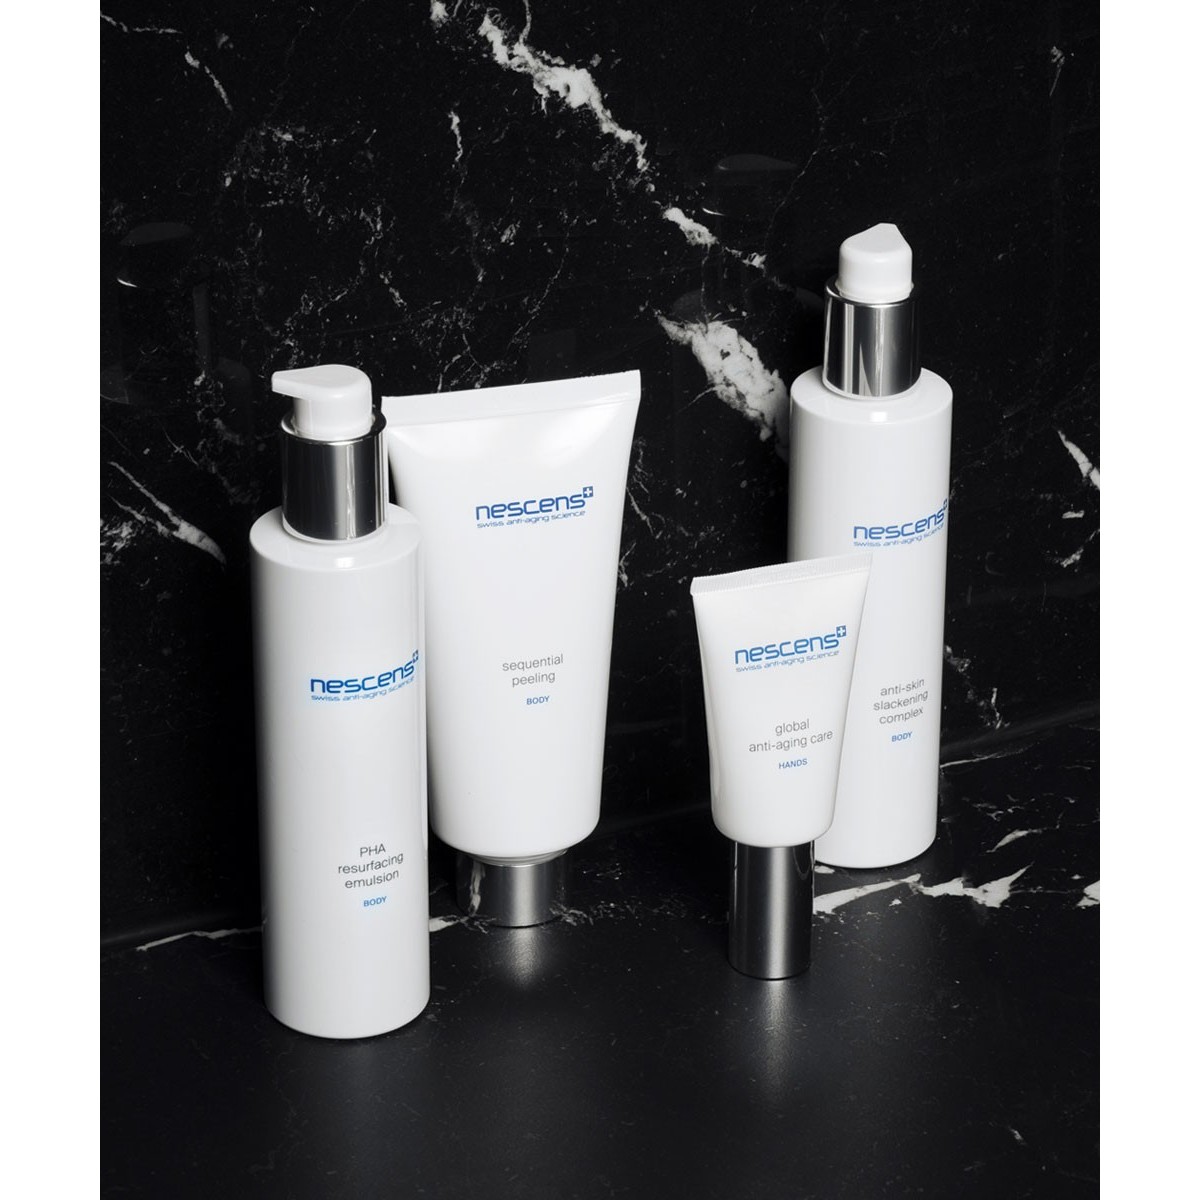 The High Rejuvenation body protocol restores the skin's youthfulness markers, making it supple and soft again.